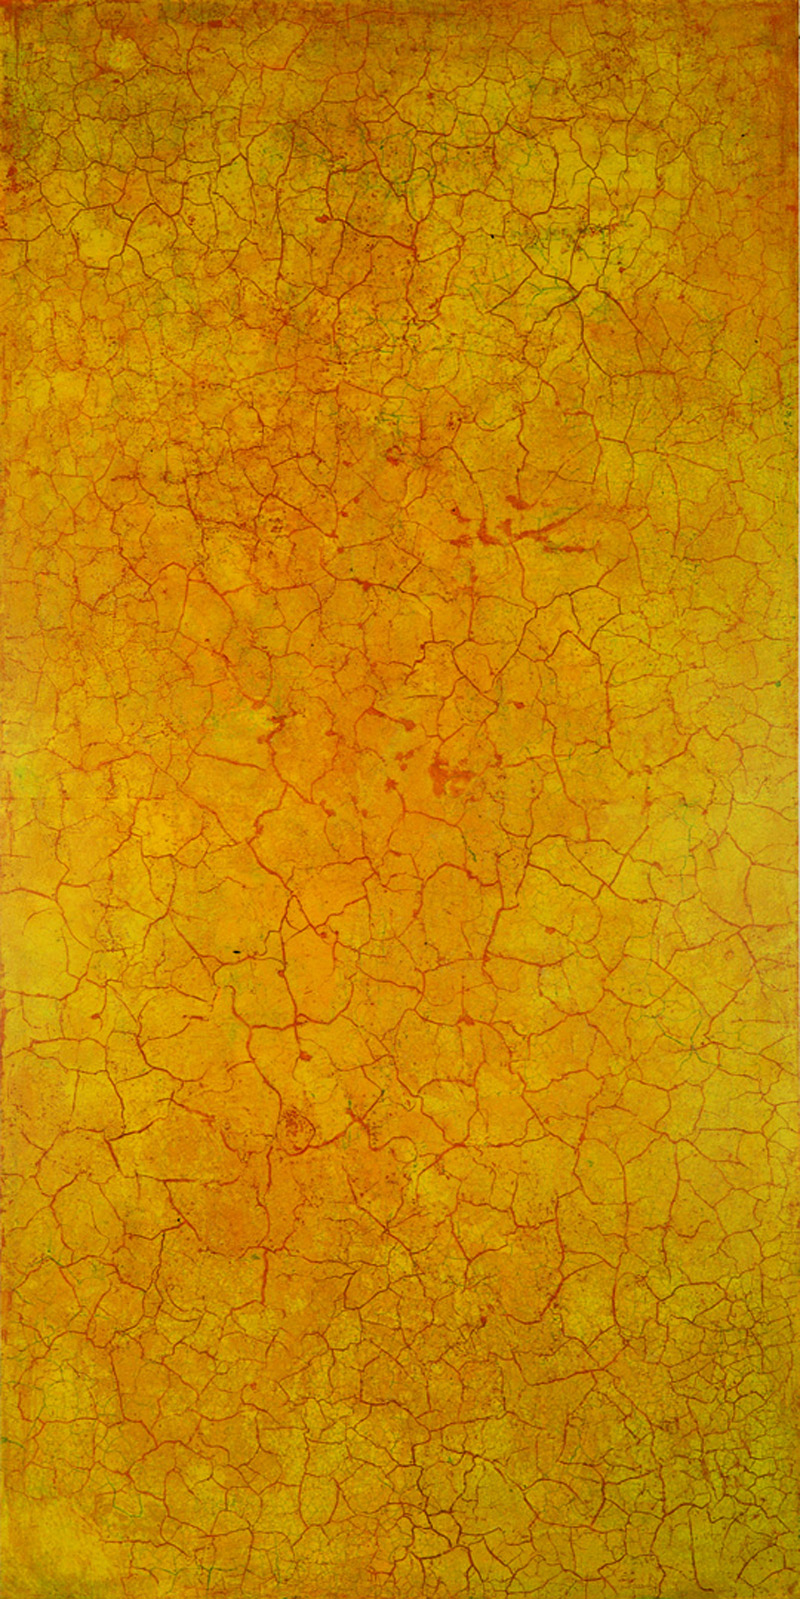   Krakelering # 1 . 1995. Lacquer, oil and pigment on birch plywood. 280 x 140 cm. 